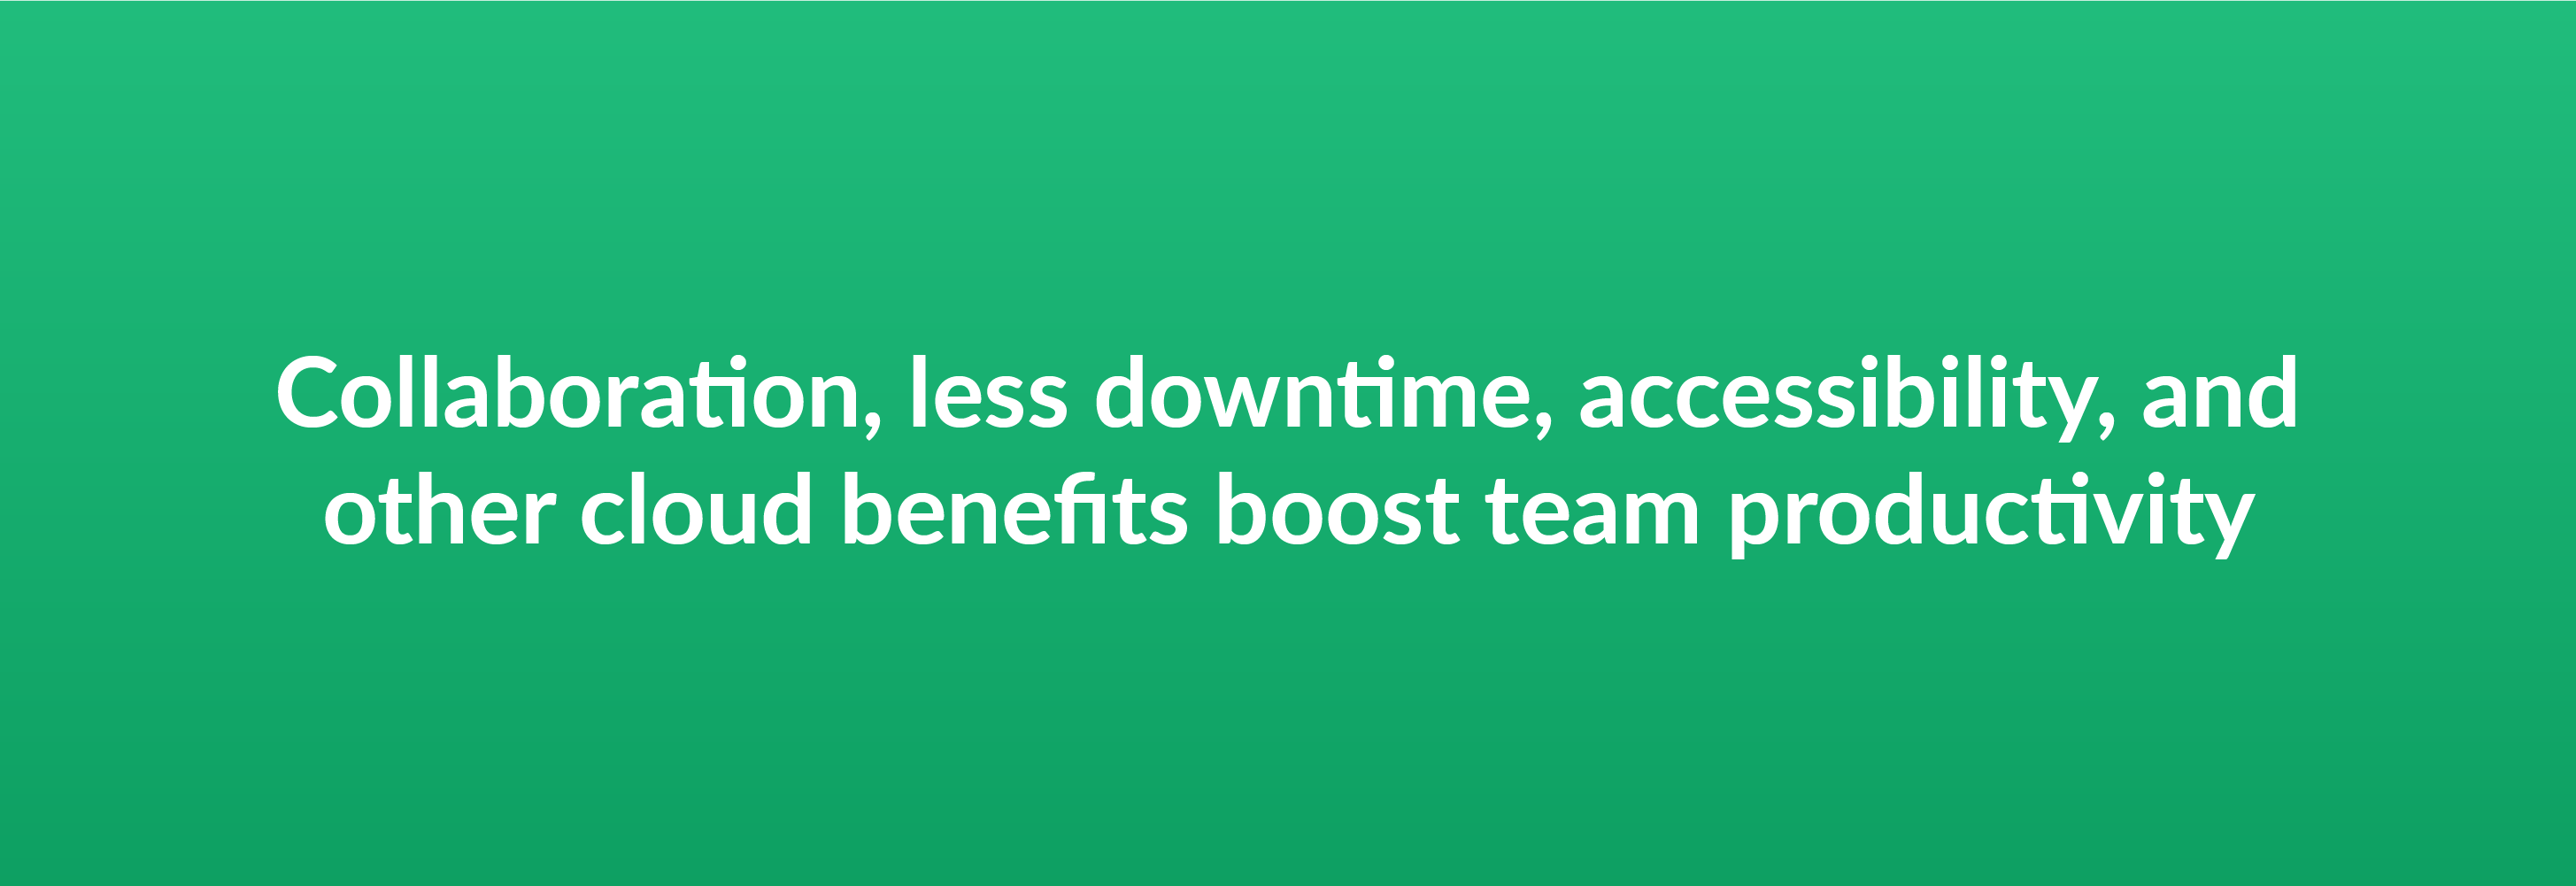 Collaboration, less downtime, accessibility, and other cloud benefits boost team productivity